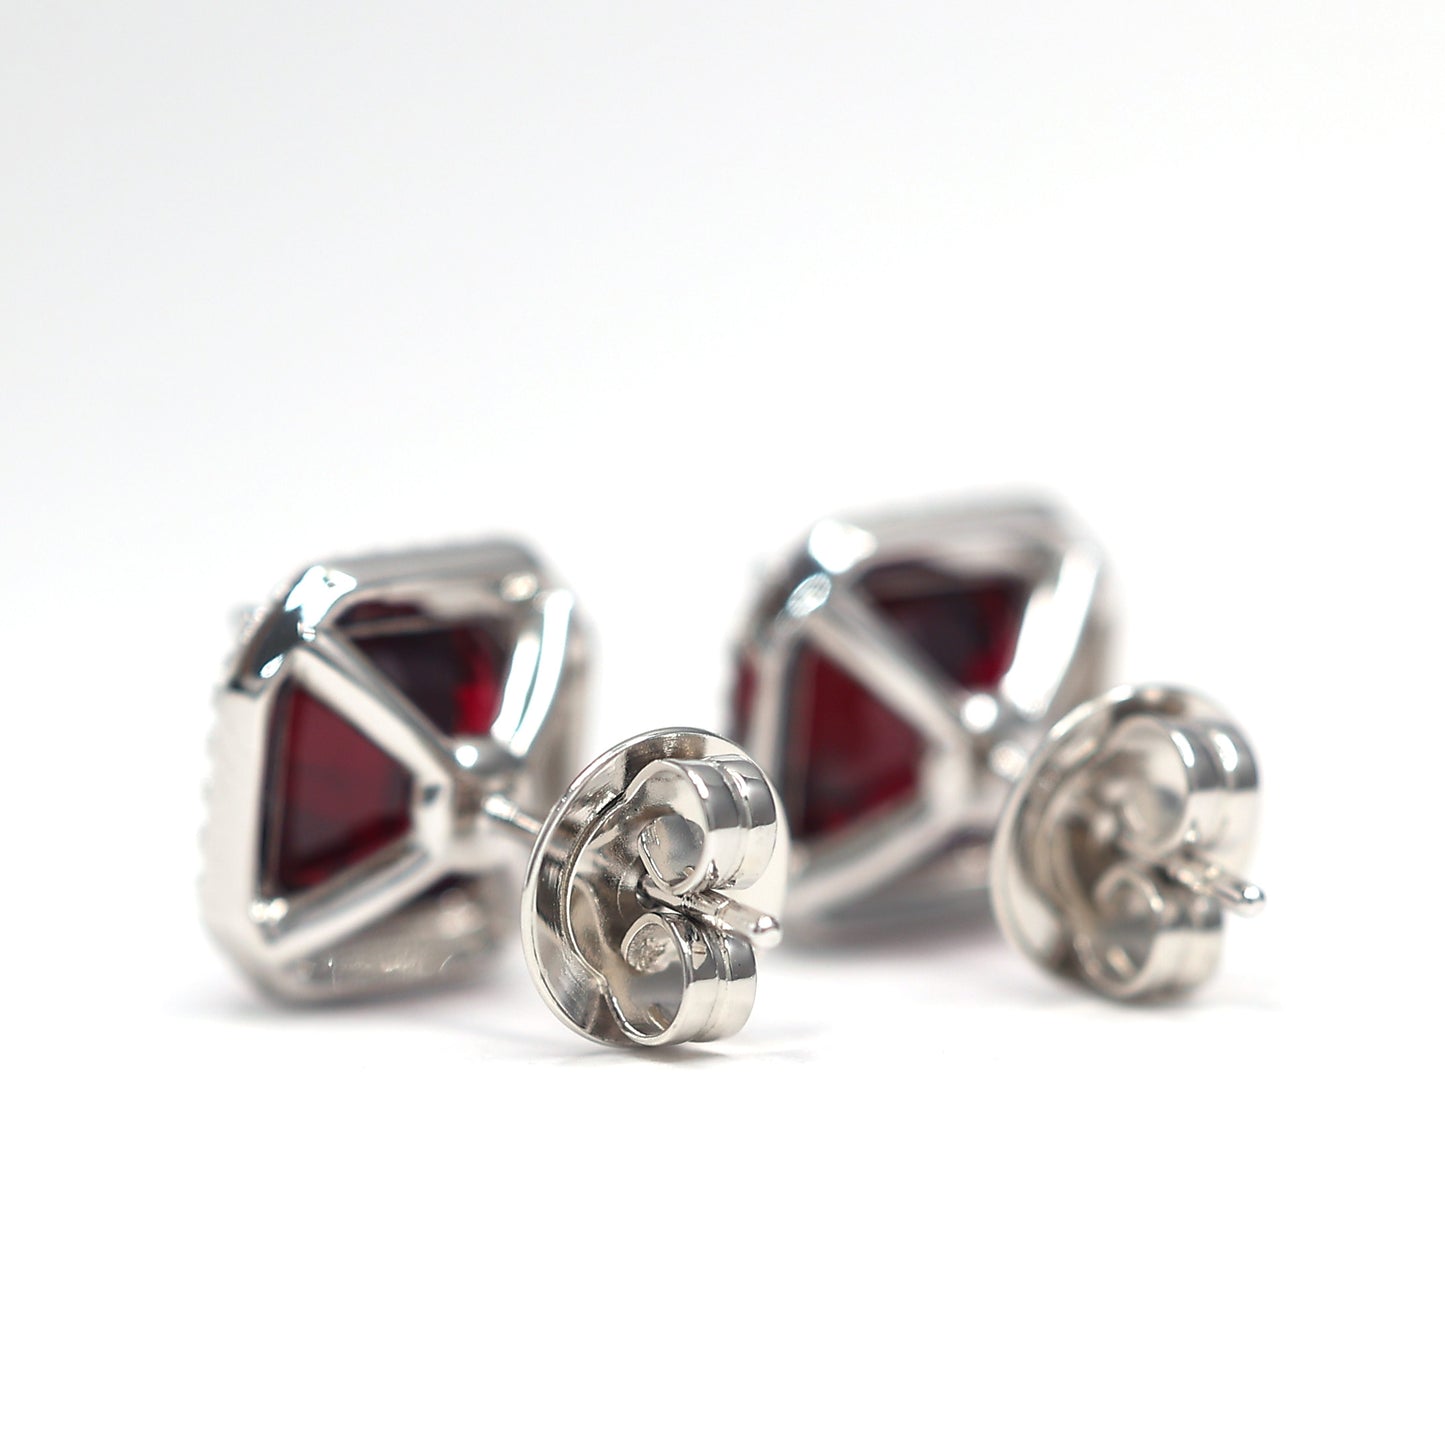 Micro-setting Ruby color square shape Lab created stones 4 prong earrings, sterling silver